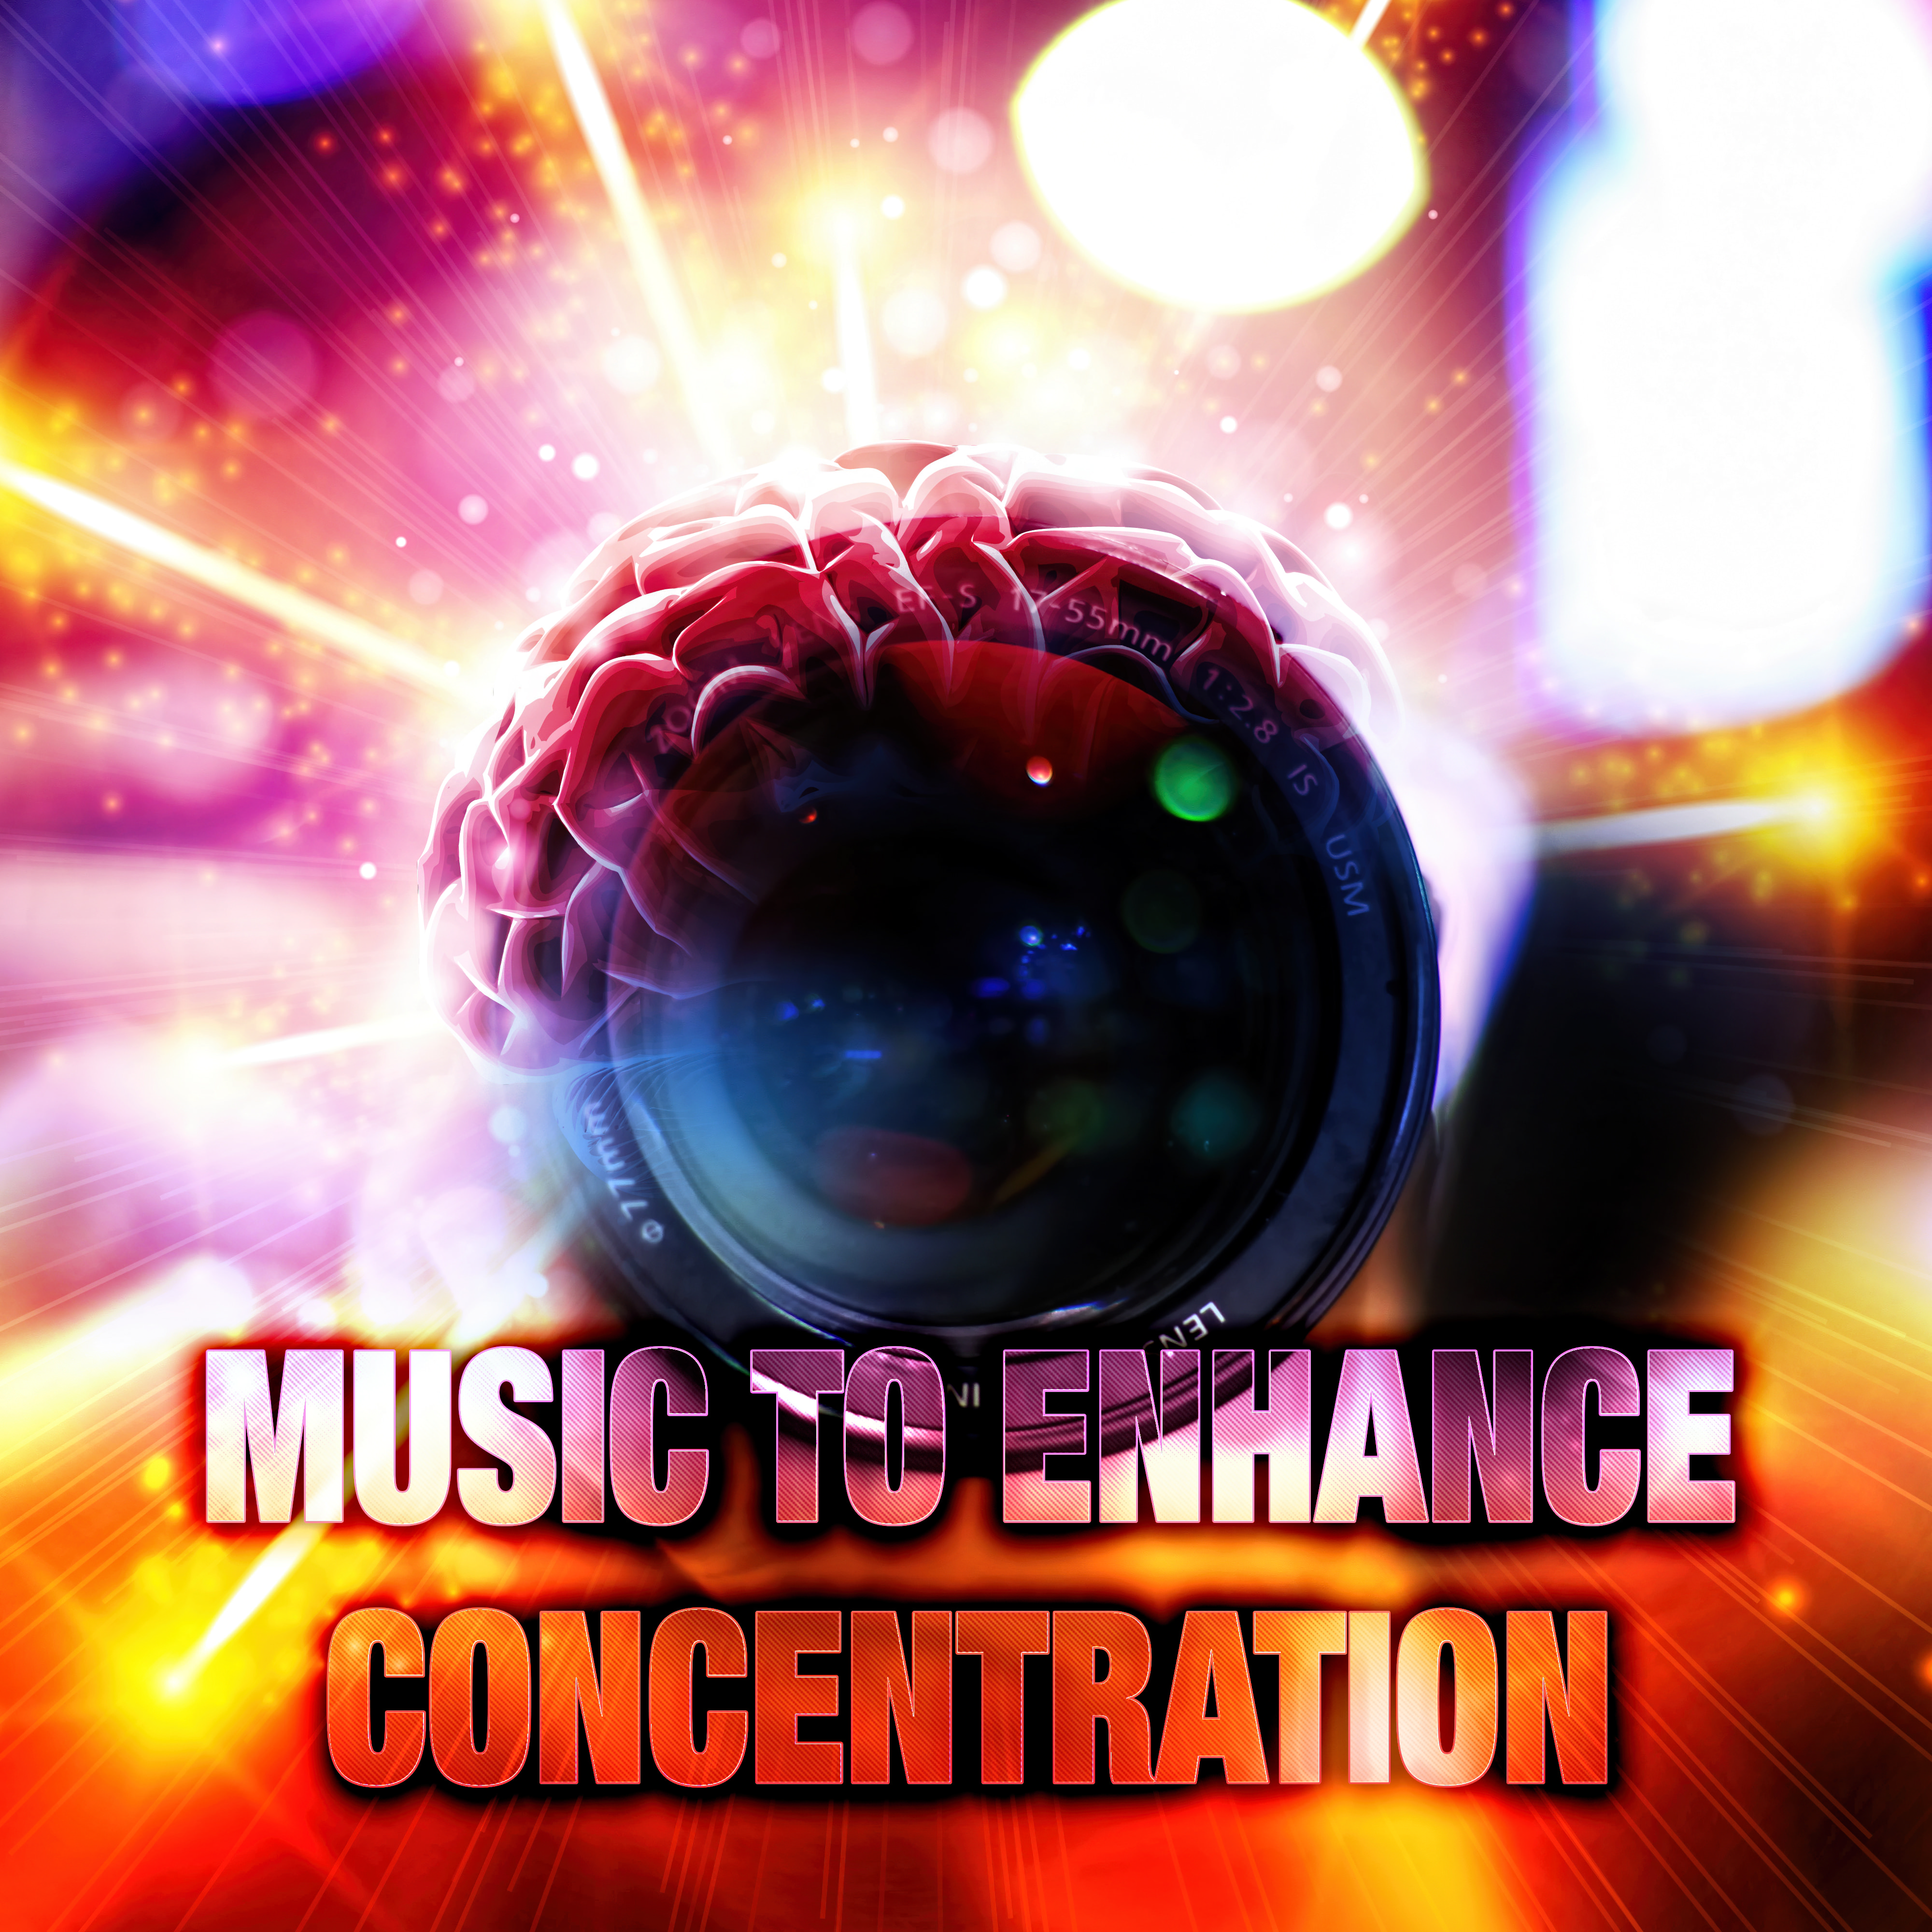 Music to Enhance Concentrate  Improve Memory  Classical Music to Increase Brain Power, Active Listening, Brainfood Study Music, Focus with Classics